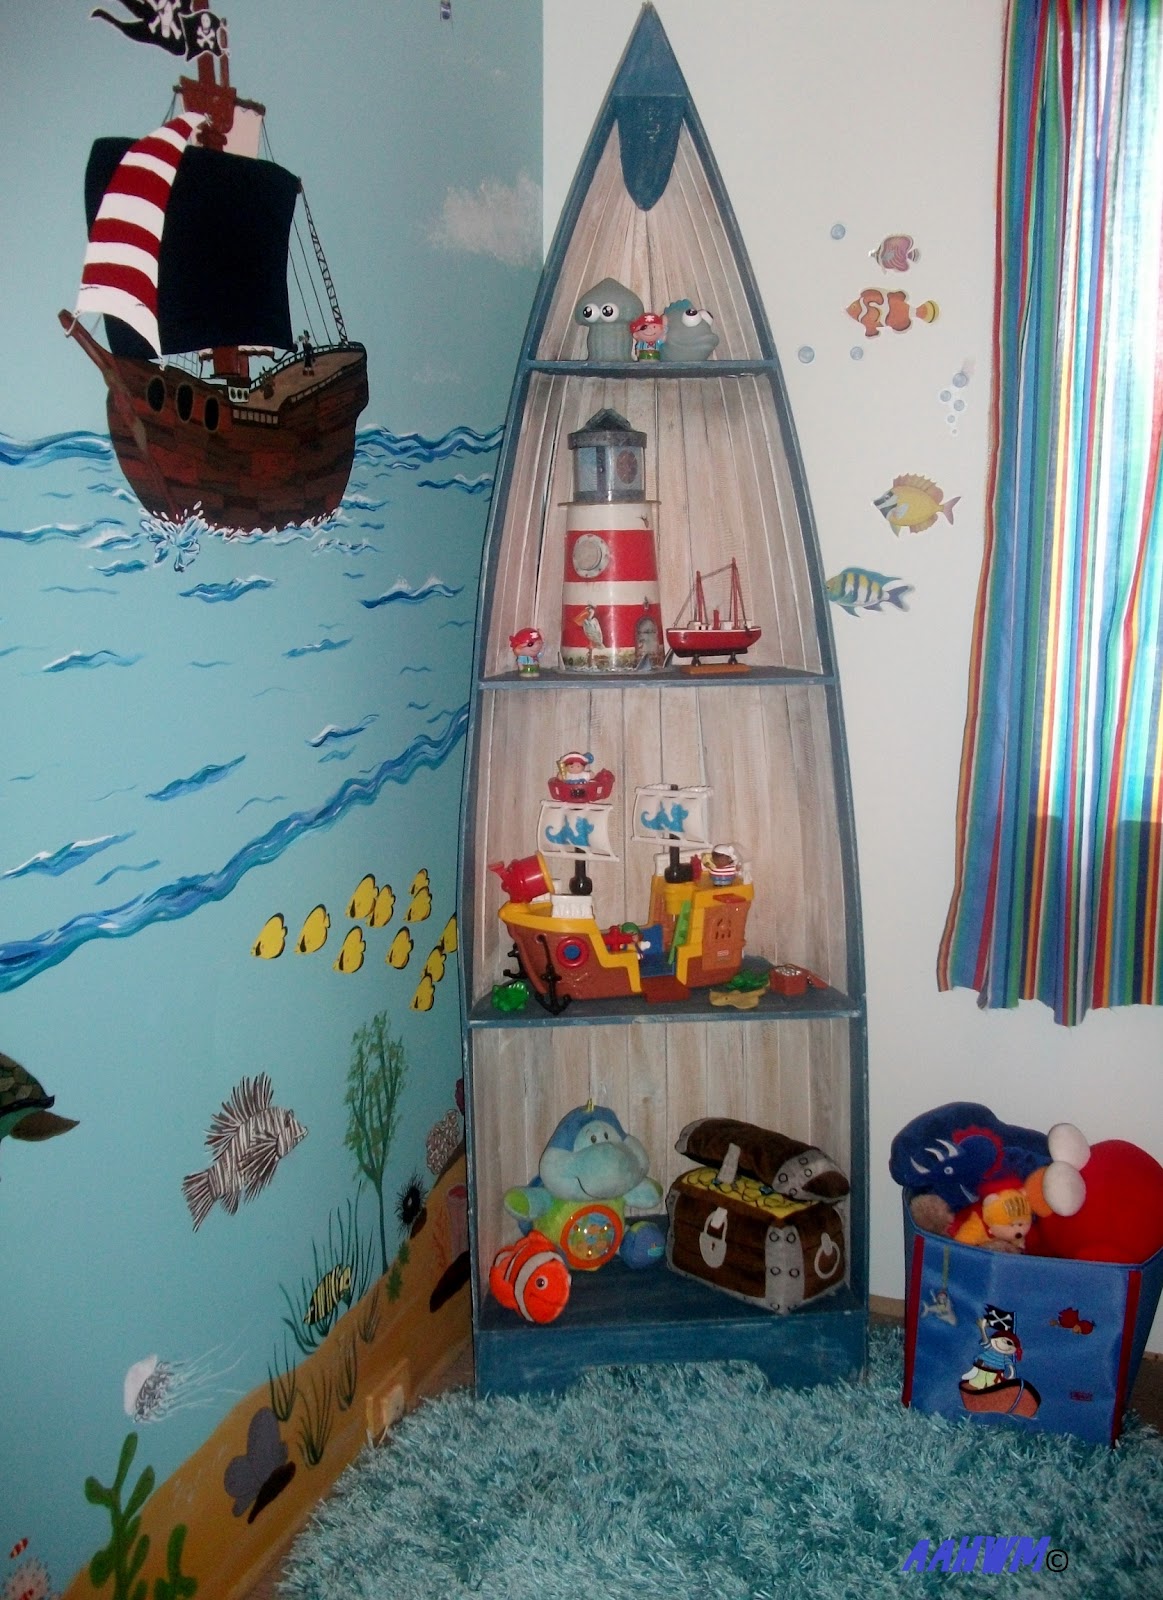 Adventures at home with Mum: The Pirate Room